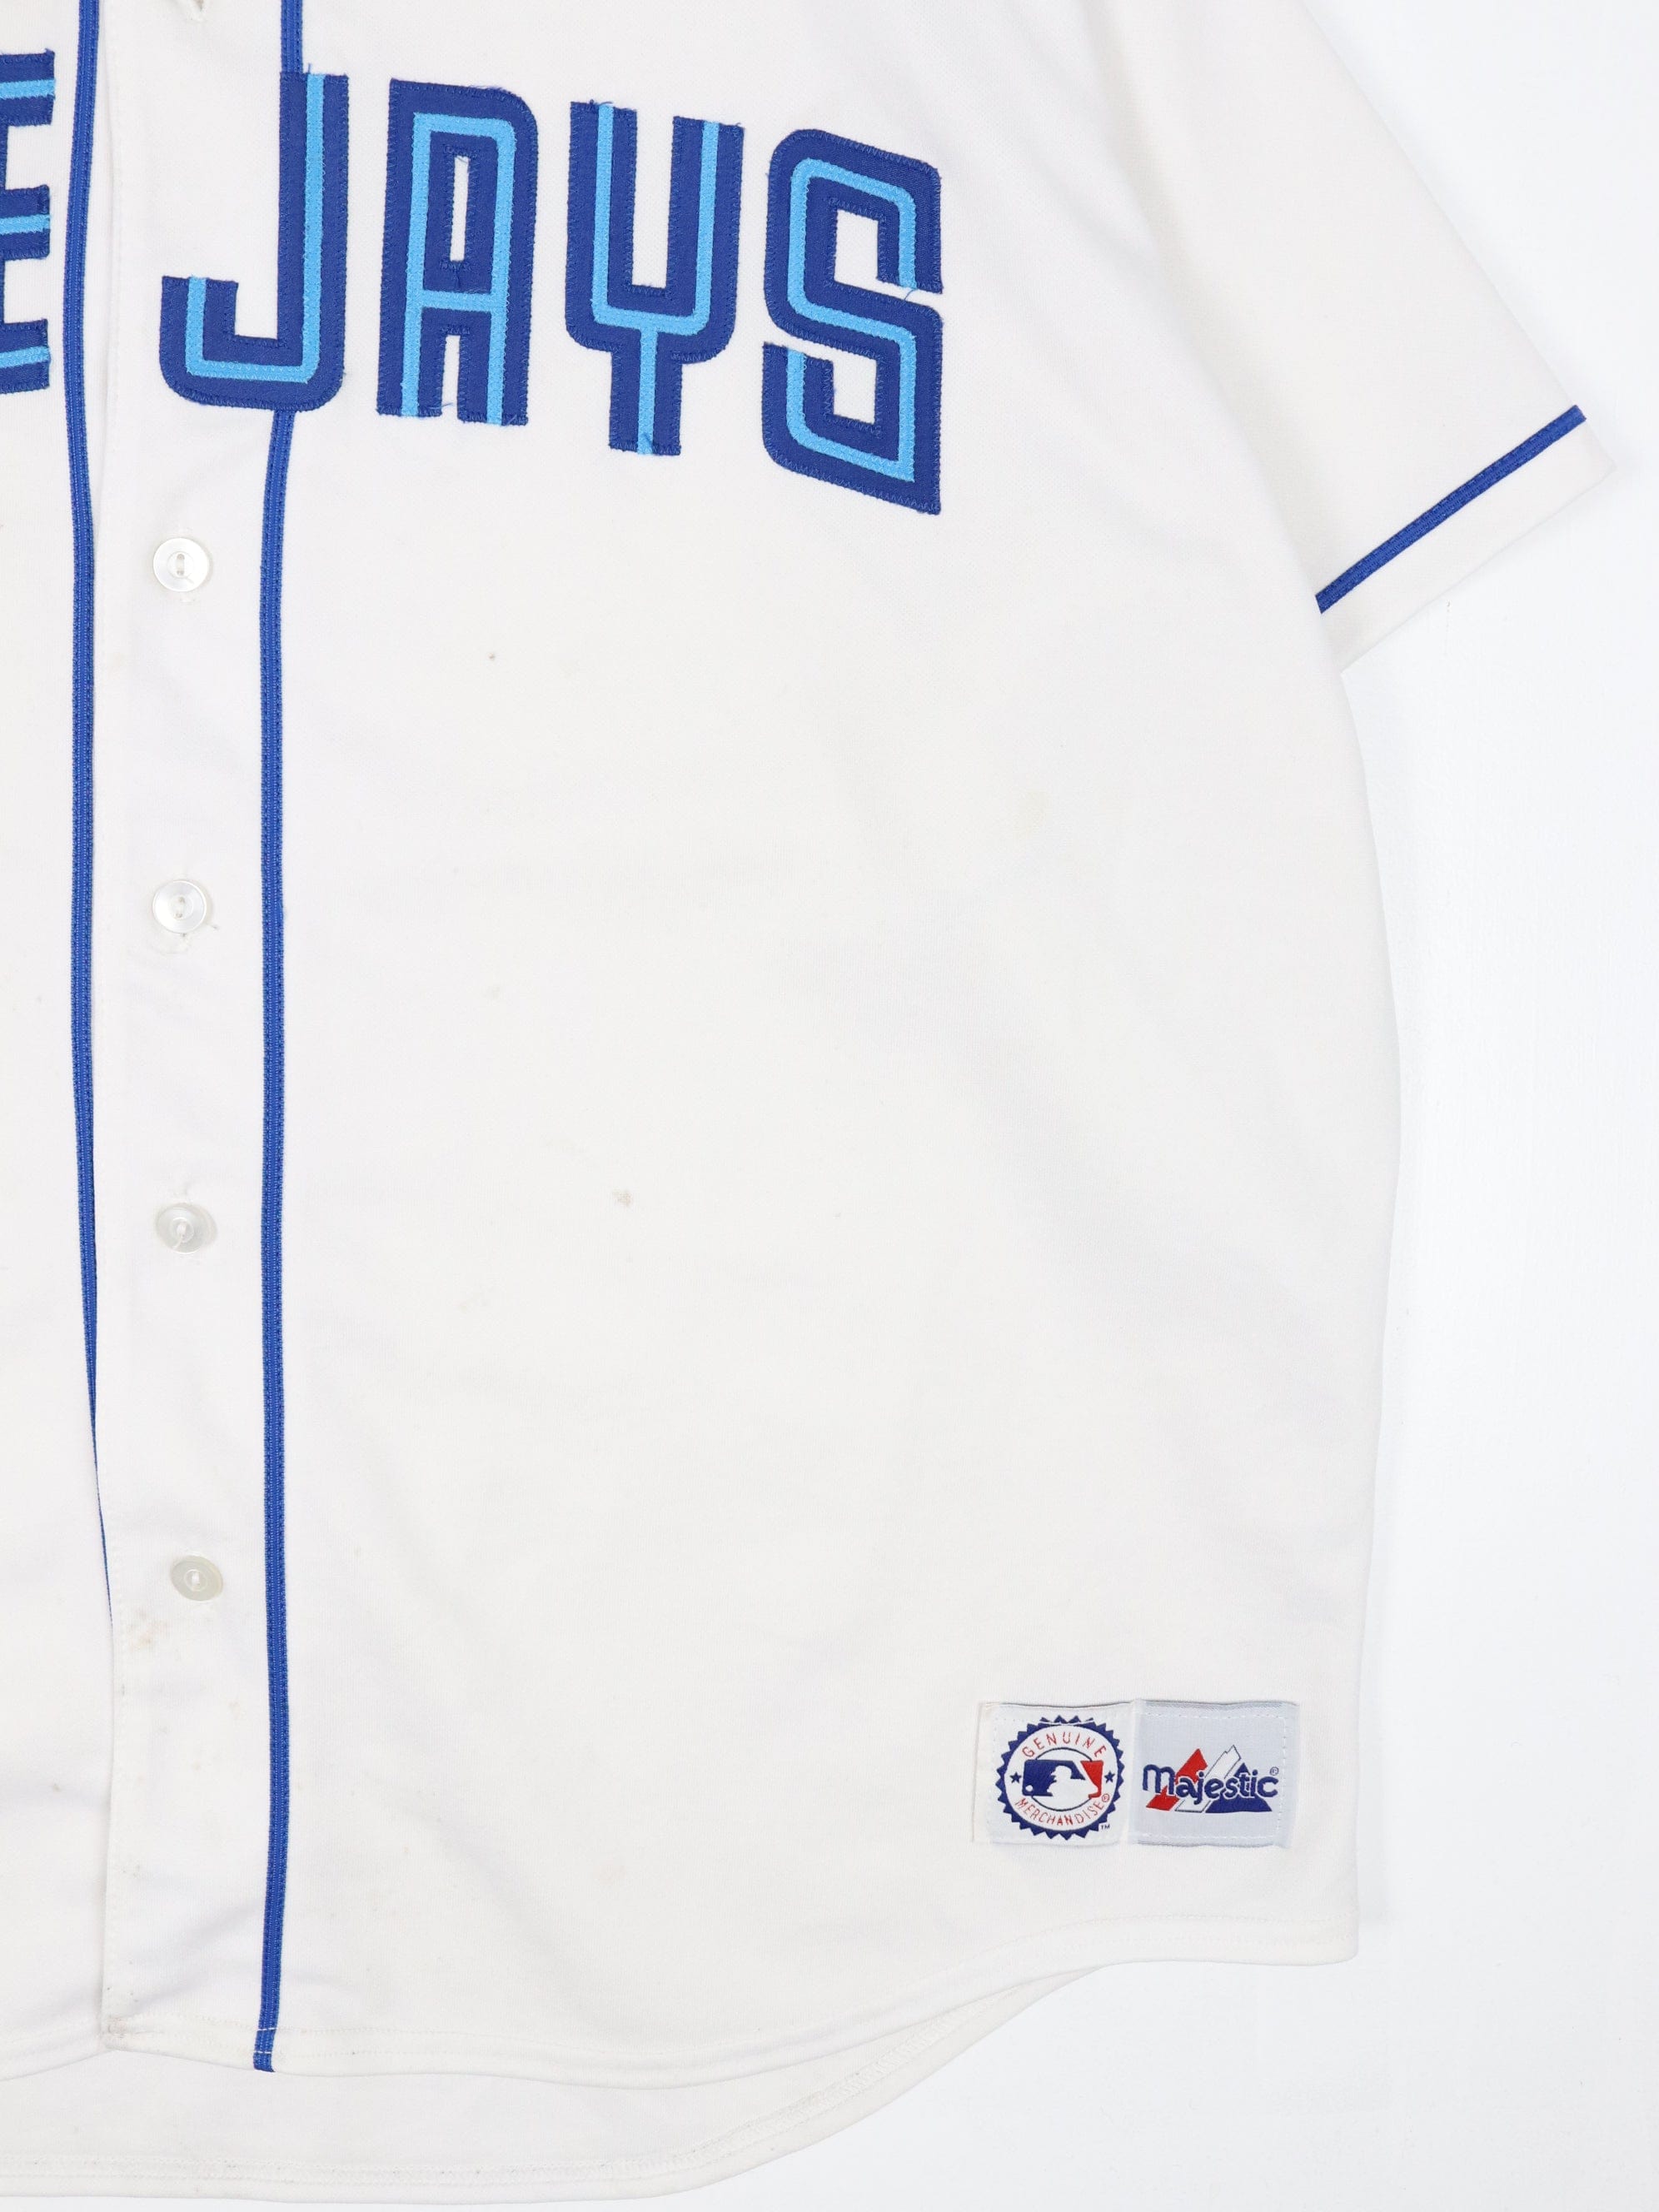 New Blue Jays Jerseys Are A Total Retro Throwback - Narcity